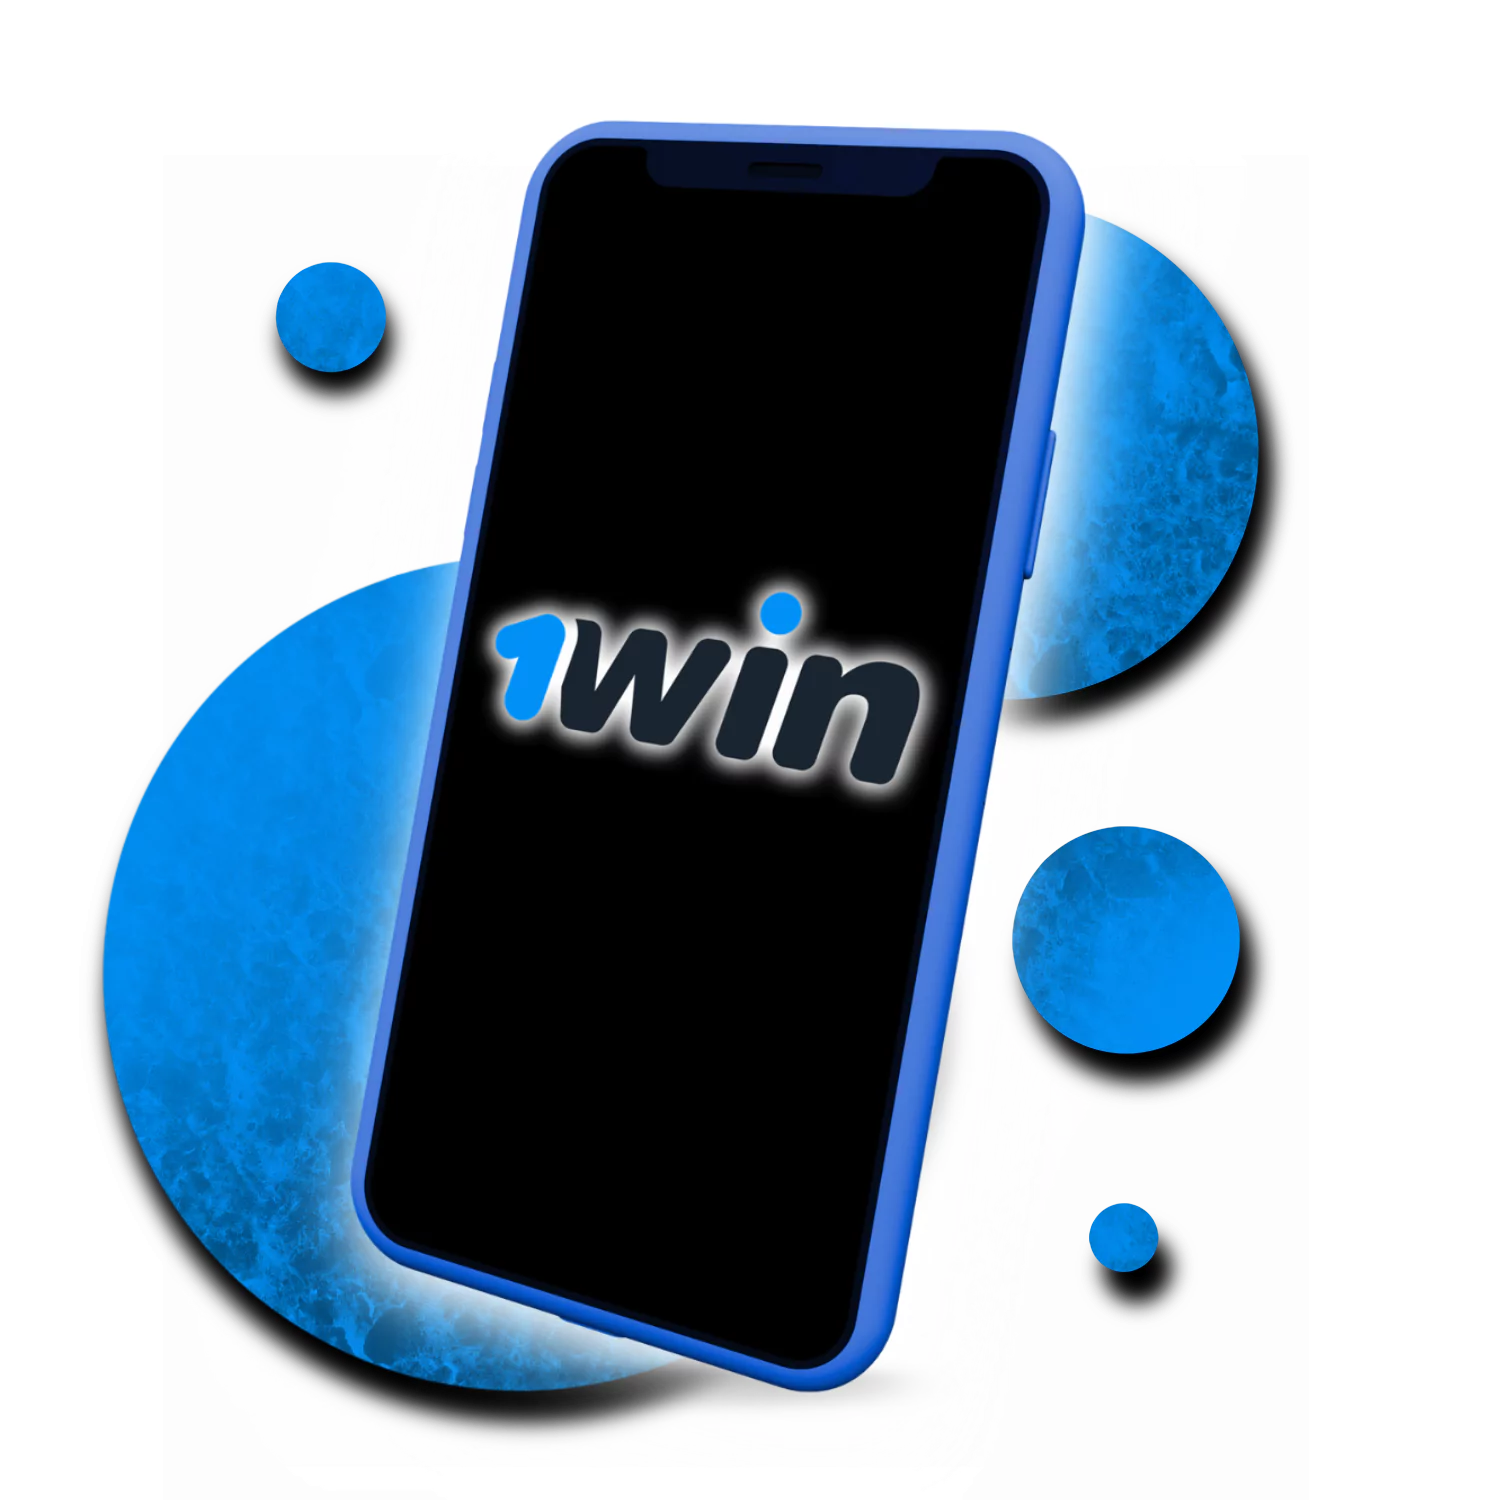 Learn about how to download and install the 1Win mobile app for Android and iOS.